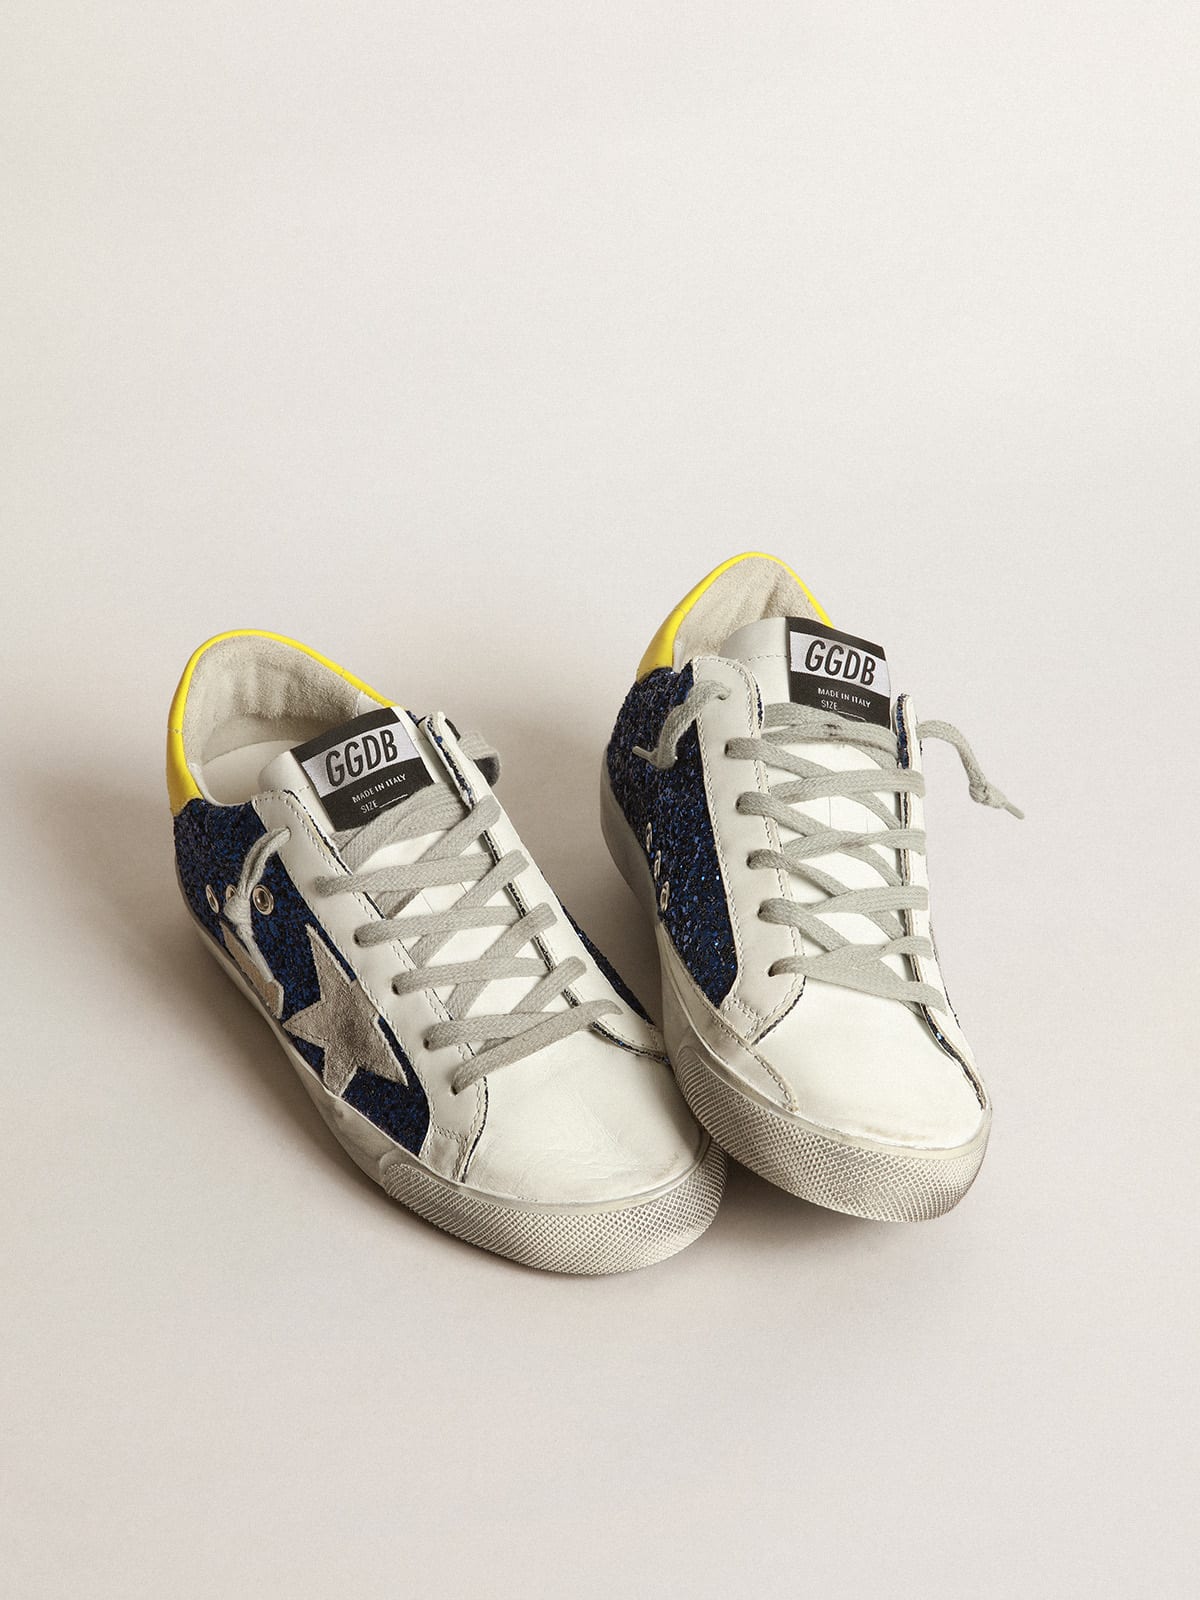 Golden Goose - Super-Star sneakers with blue glitter and yellow heel tab in 